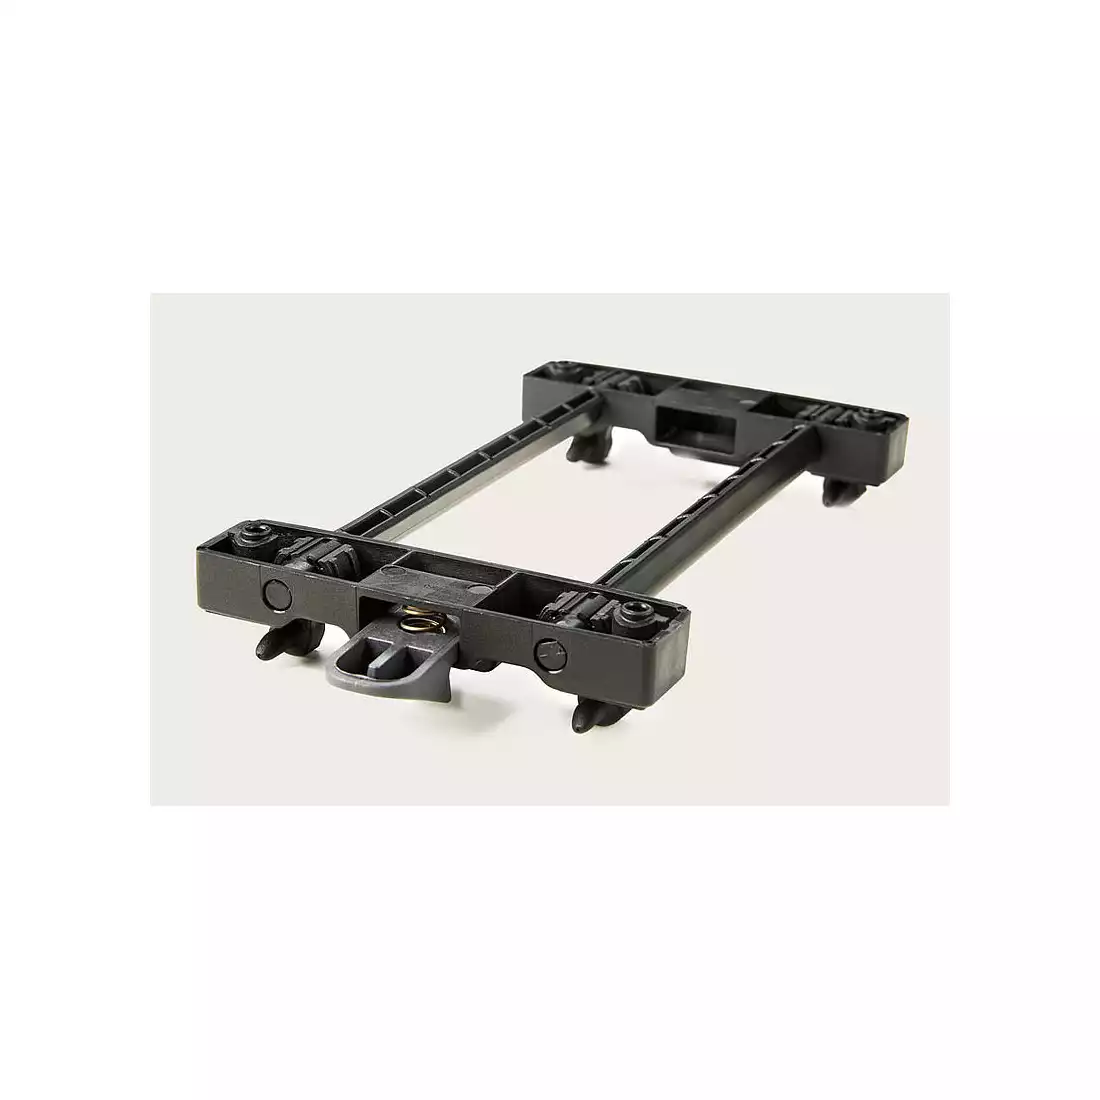 residu Zichzelf molecuul TUBUS RACKTIME SNAP IT SYSTEM ADAPTER rack mounting system Racktime  TB-17017 | MikeSPORT